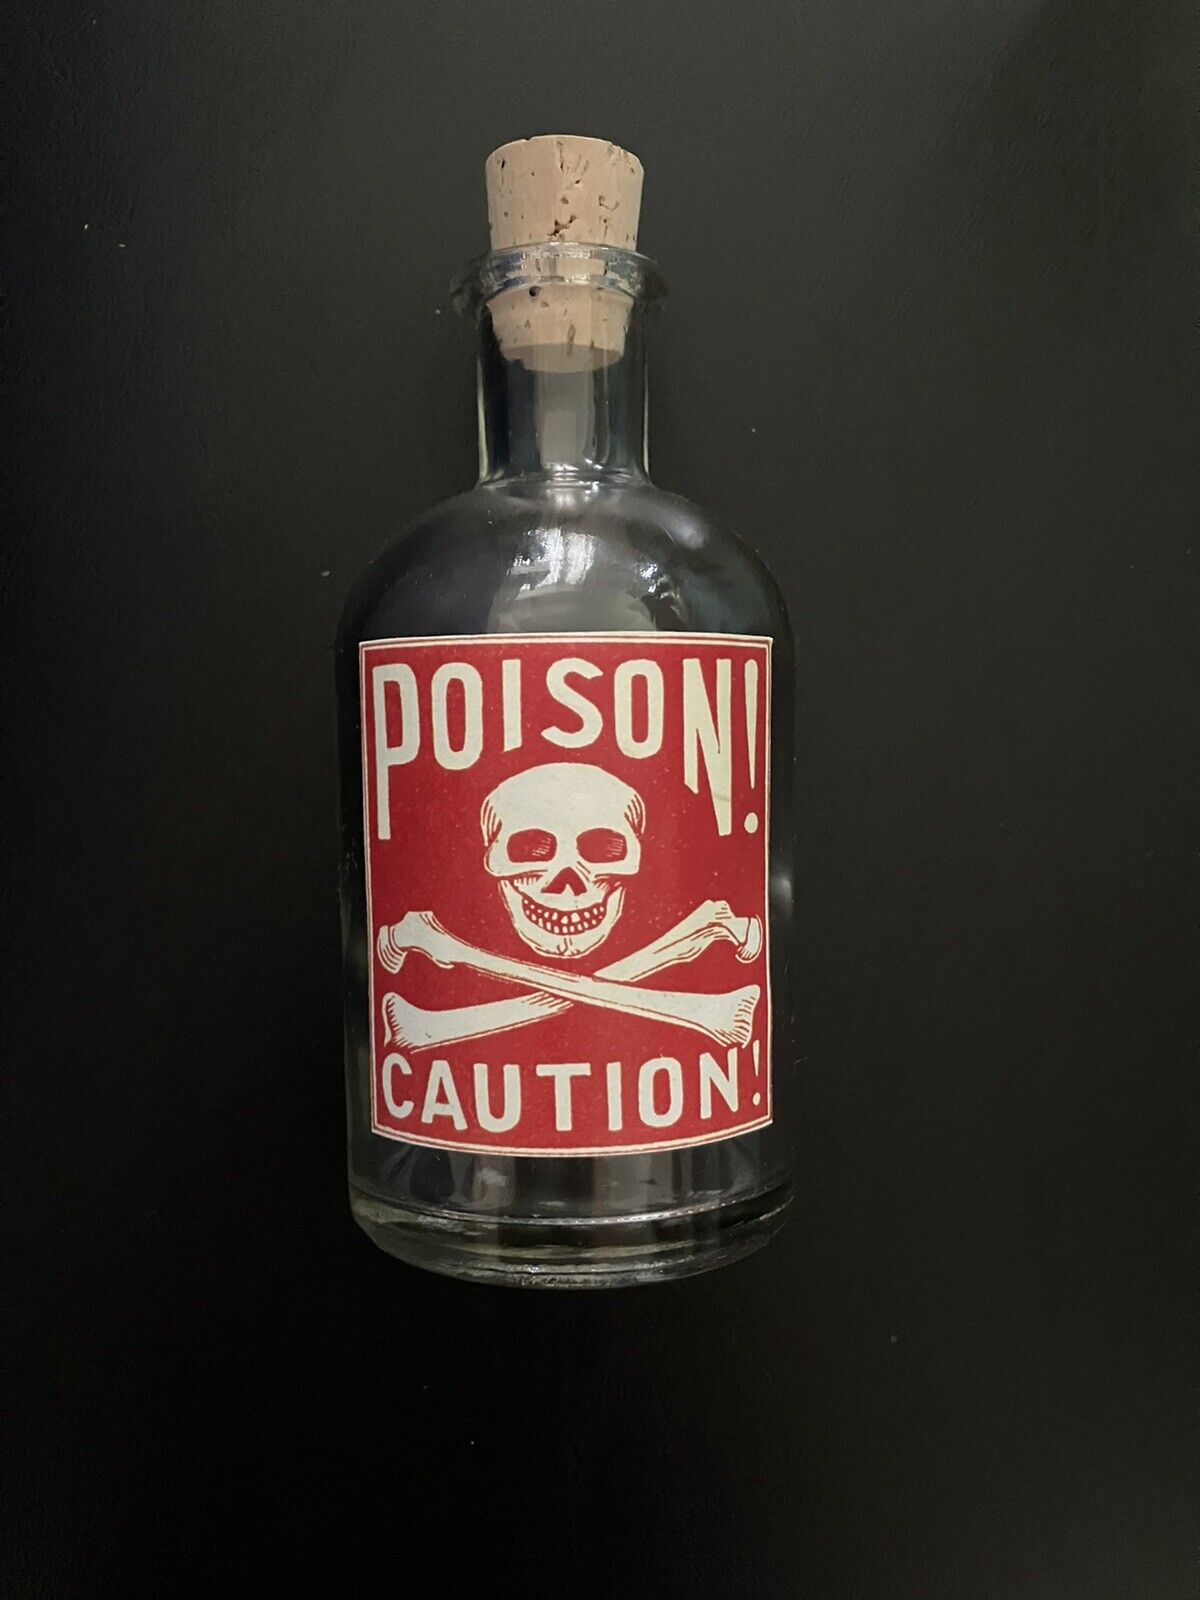 Poison Bottle - VERY RARE Skull and Crossbones Label - VINTAGE Apothecary